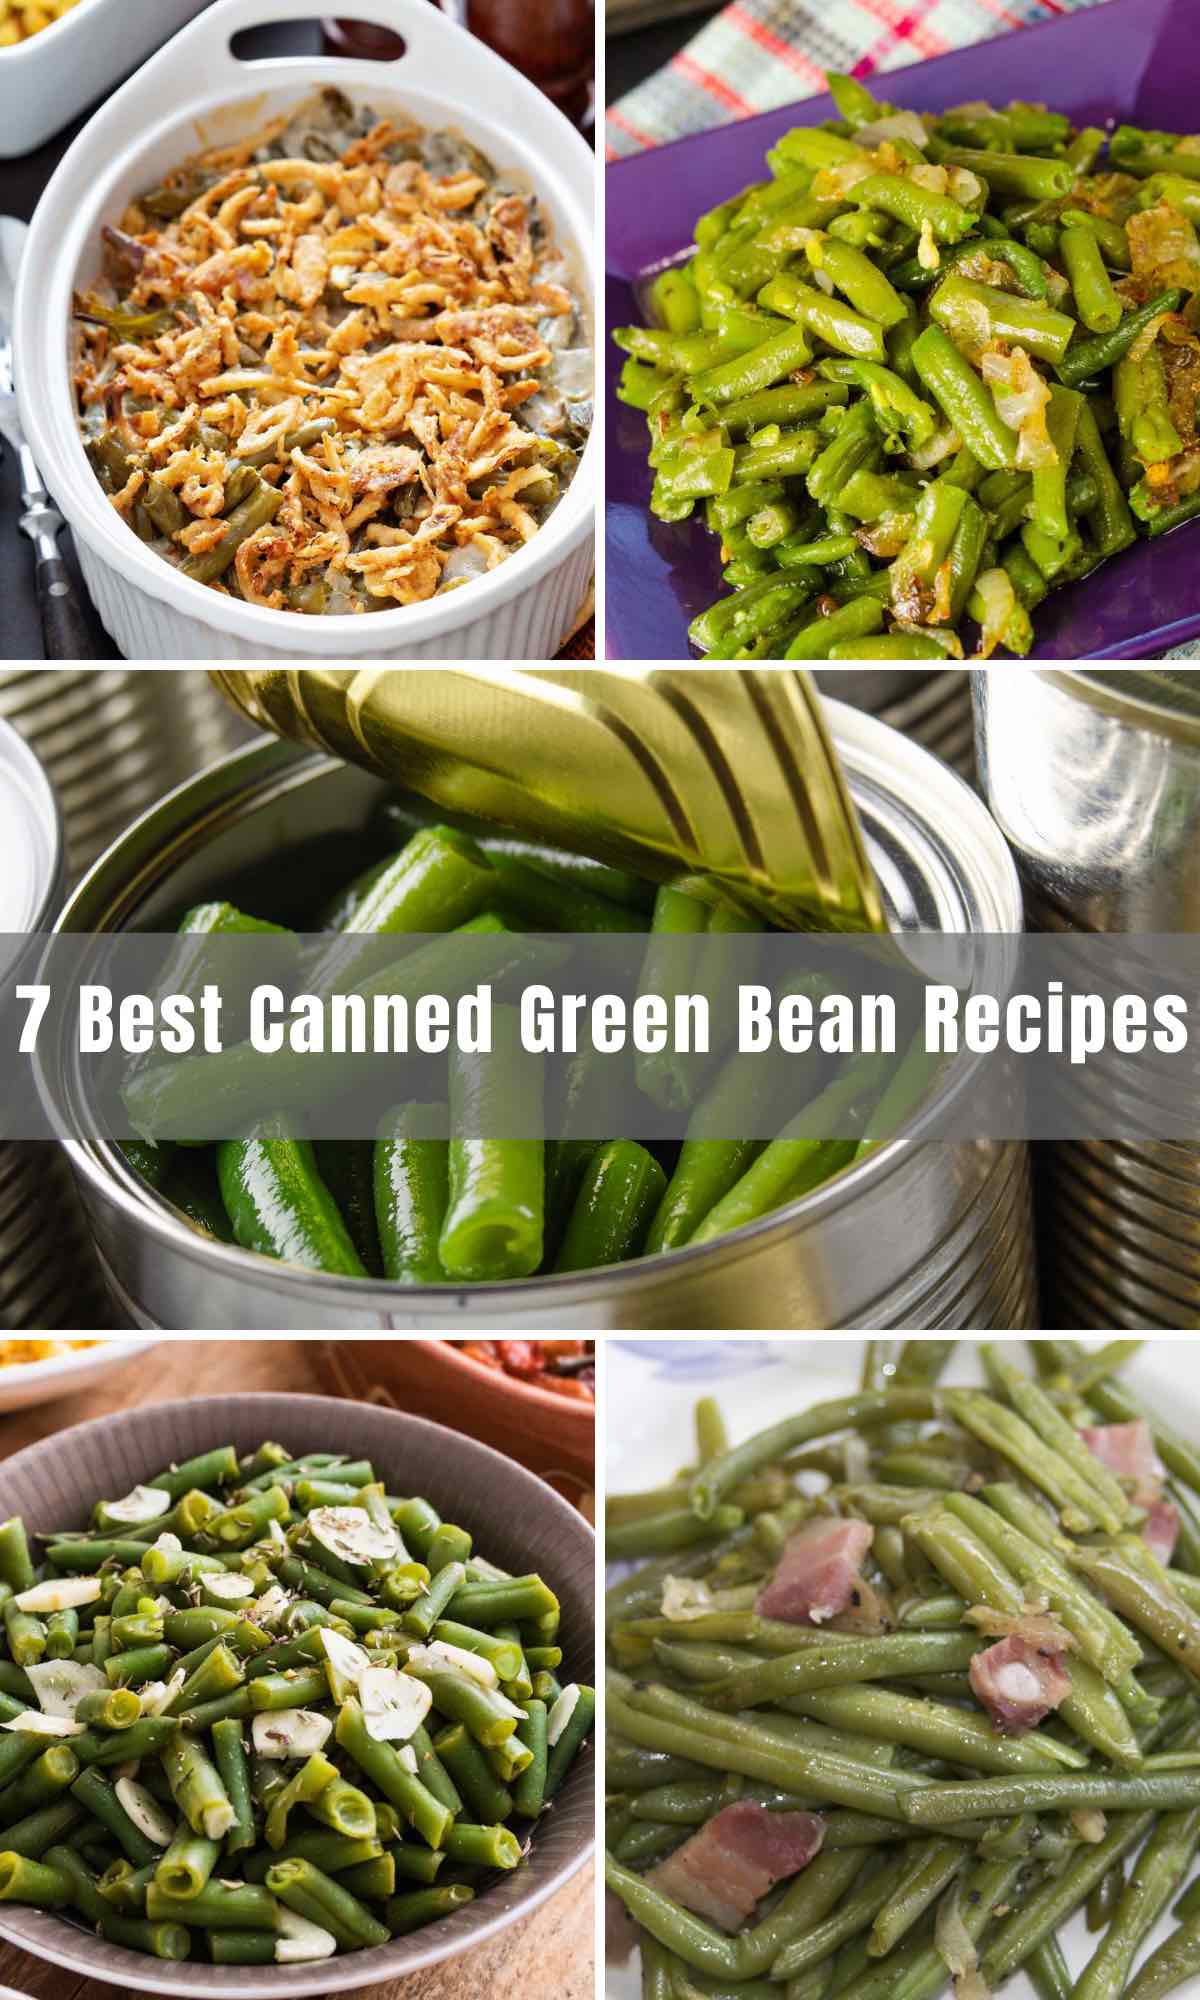 Canned Green Beans are a great way to ensure there’s always something nutritious in your pantry. Here are 7 easy canned green bean recipes to make this popular canned veggie taste even better than the fresh ones! From Sauteed Garlic Green Beans to Green Bean Casserole to Parmesan Canned Green Beans, these recipes are easy, flavorful, and quick to prepare.